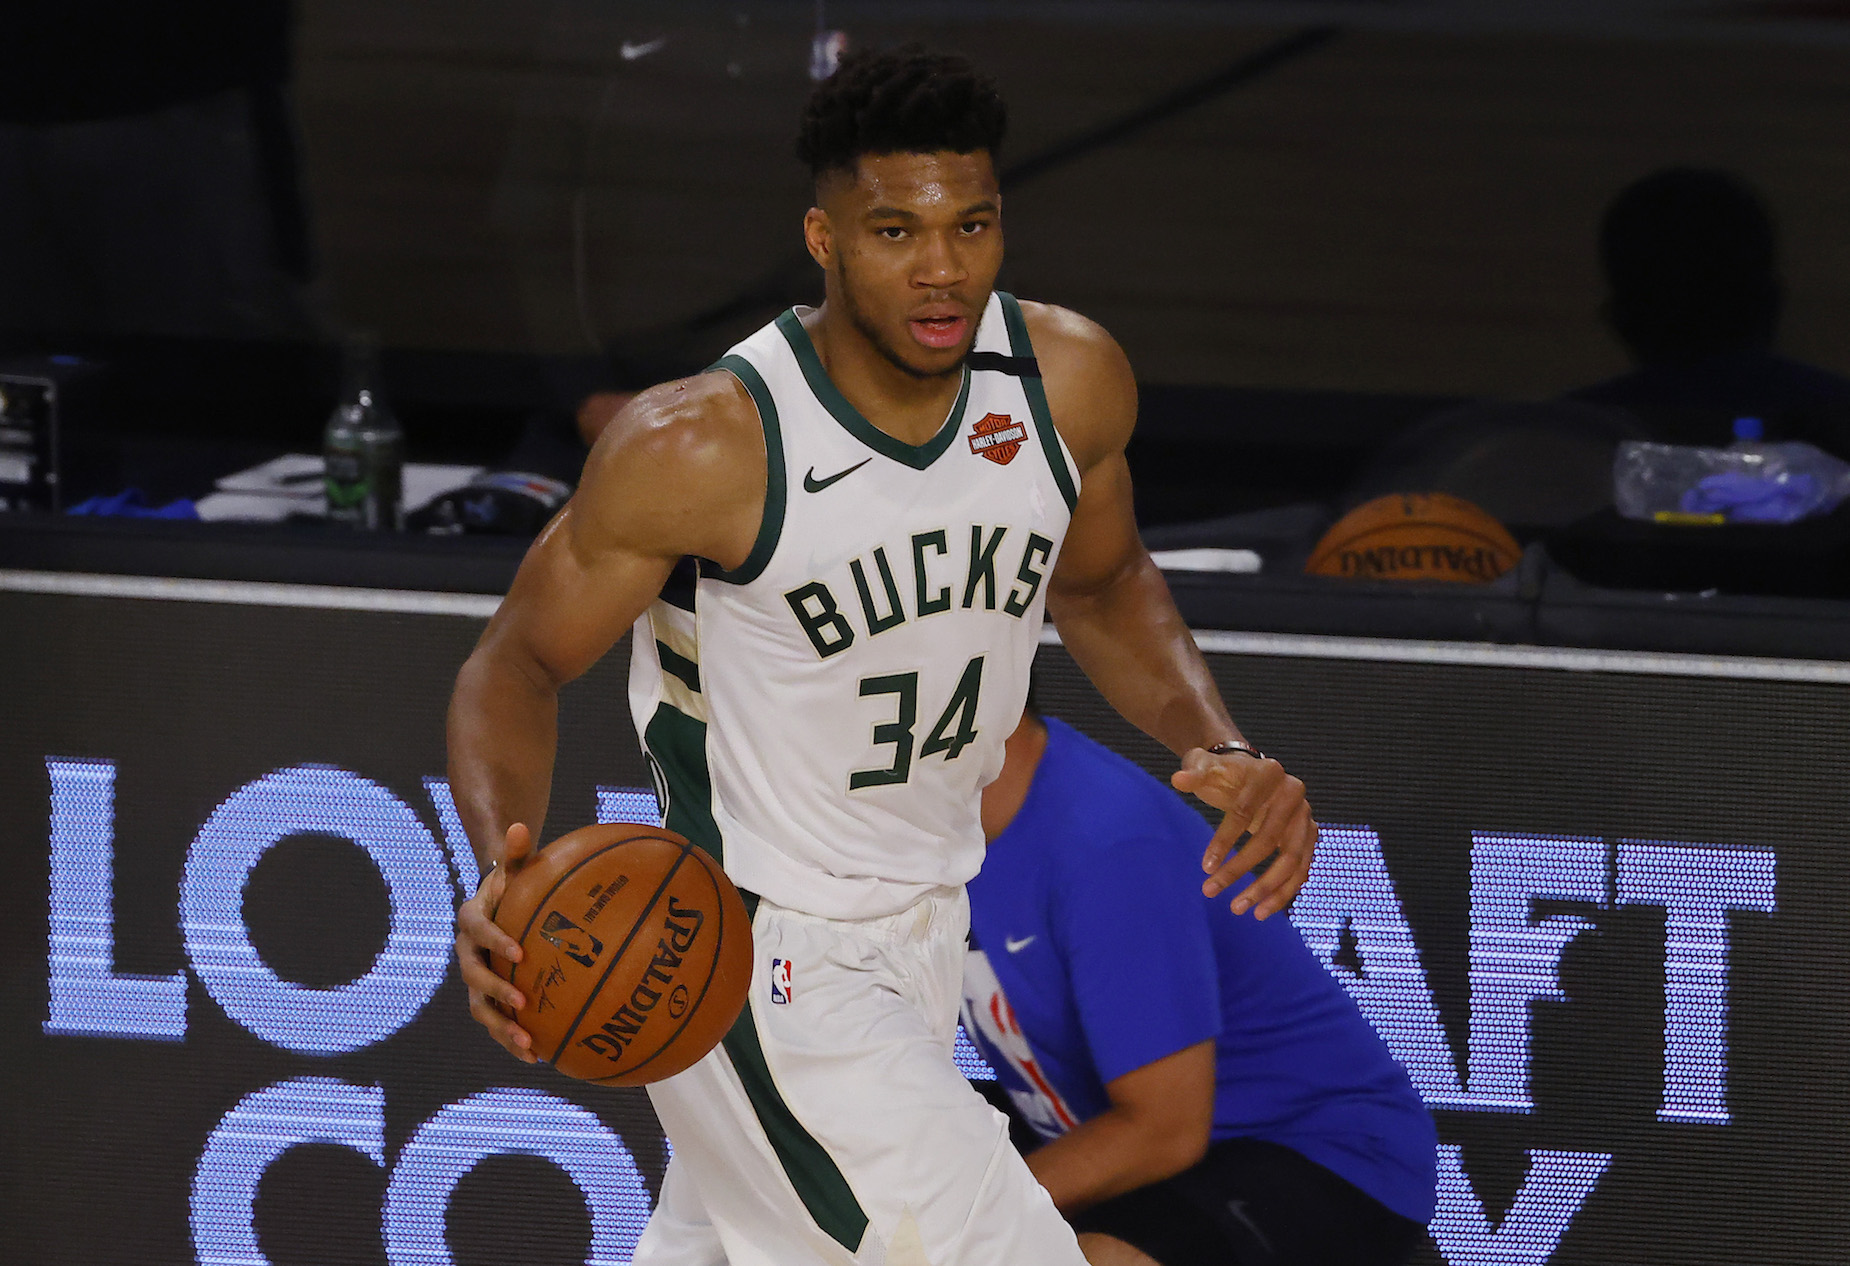 Giannis Antetokounmpo's contract is expiring next year, putting the Milwaukee Bucks in a risk-reward situation.